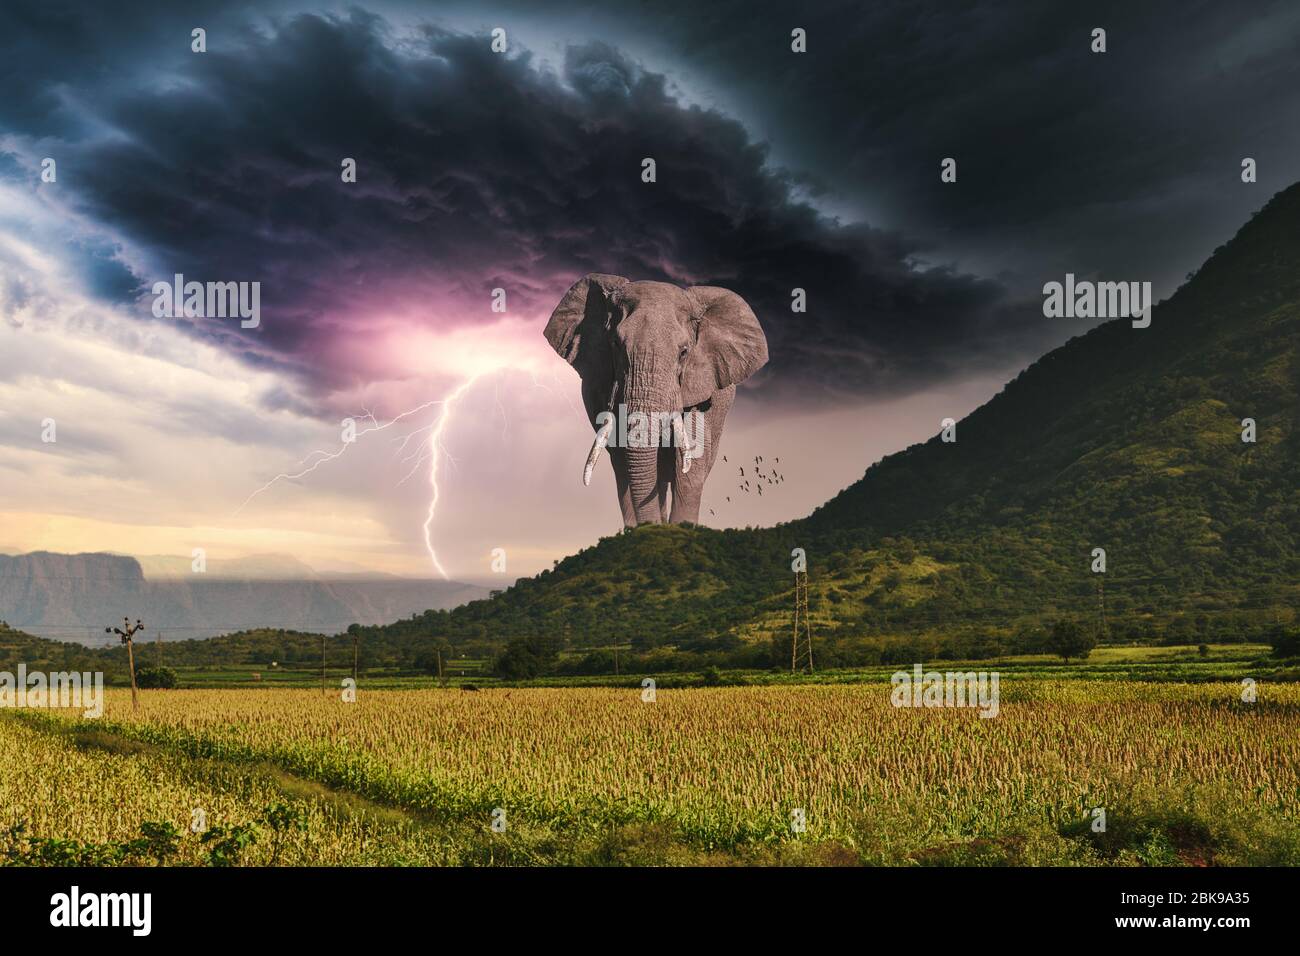 Elephant rising from the mountains. Stock Photo